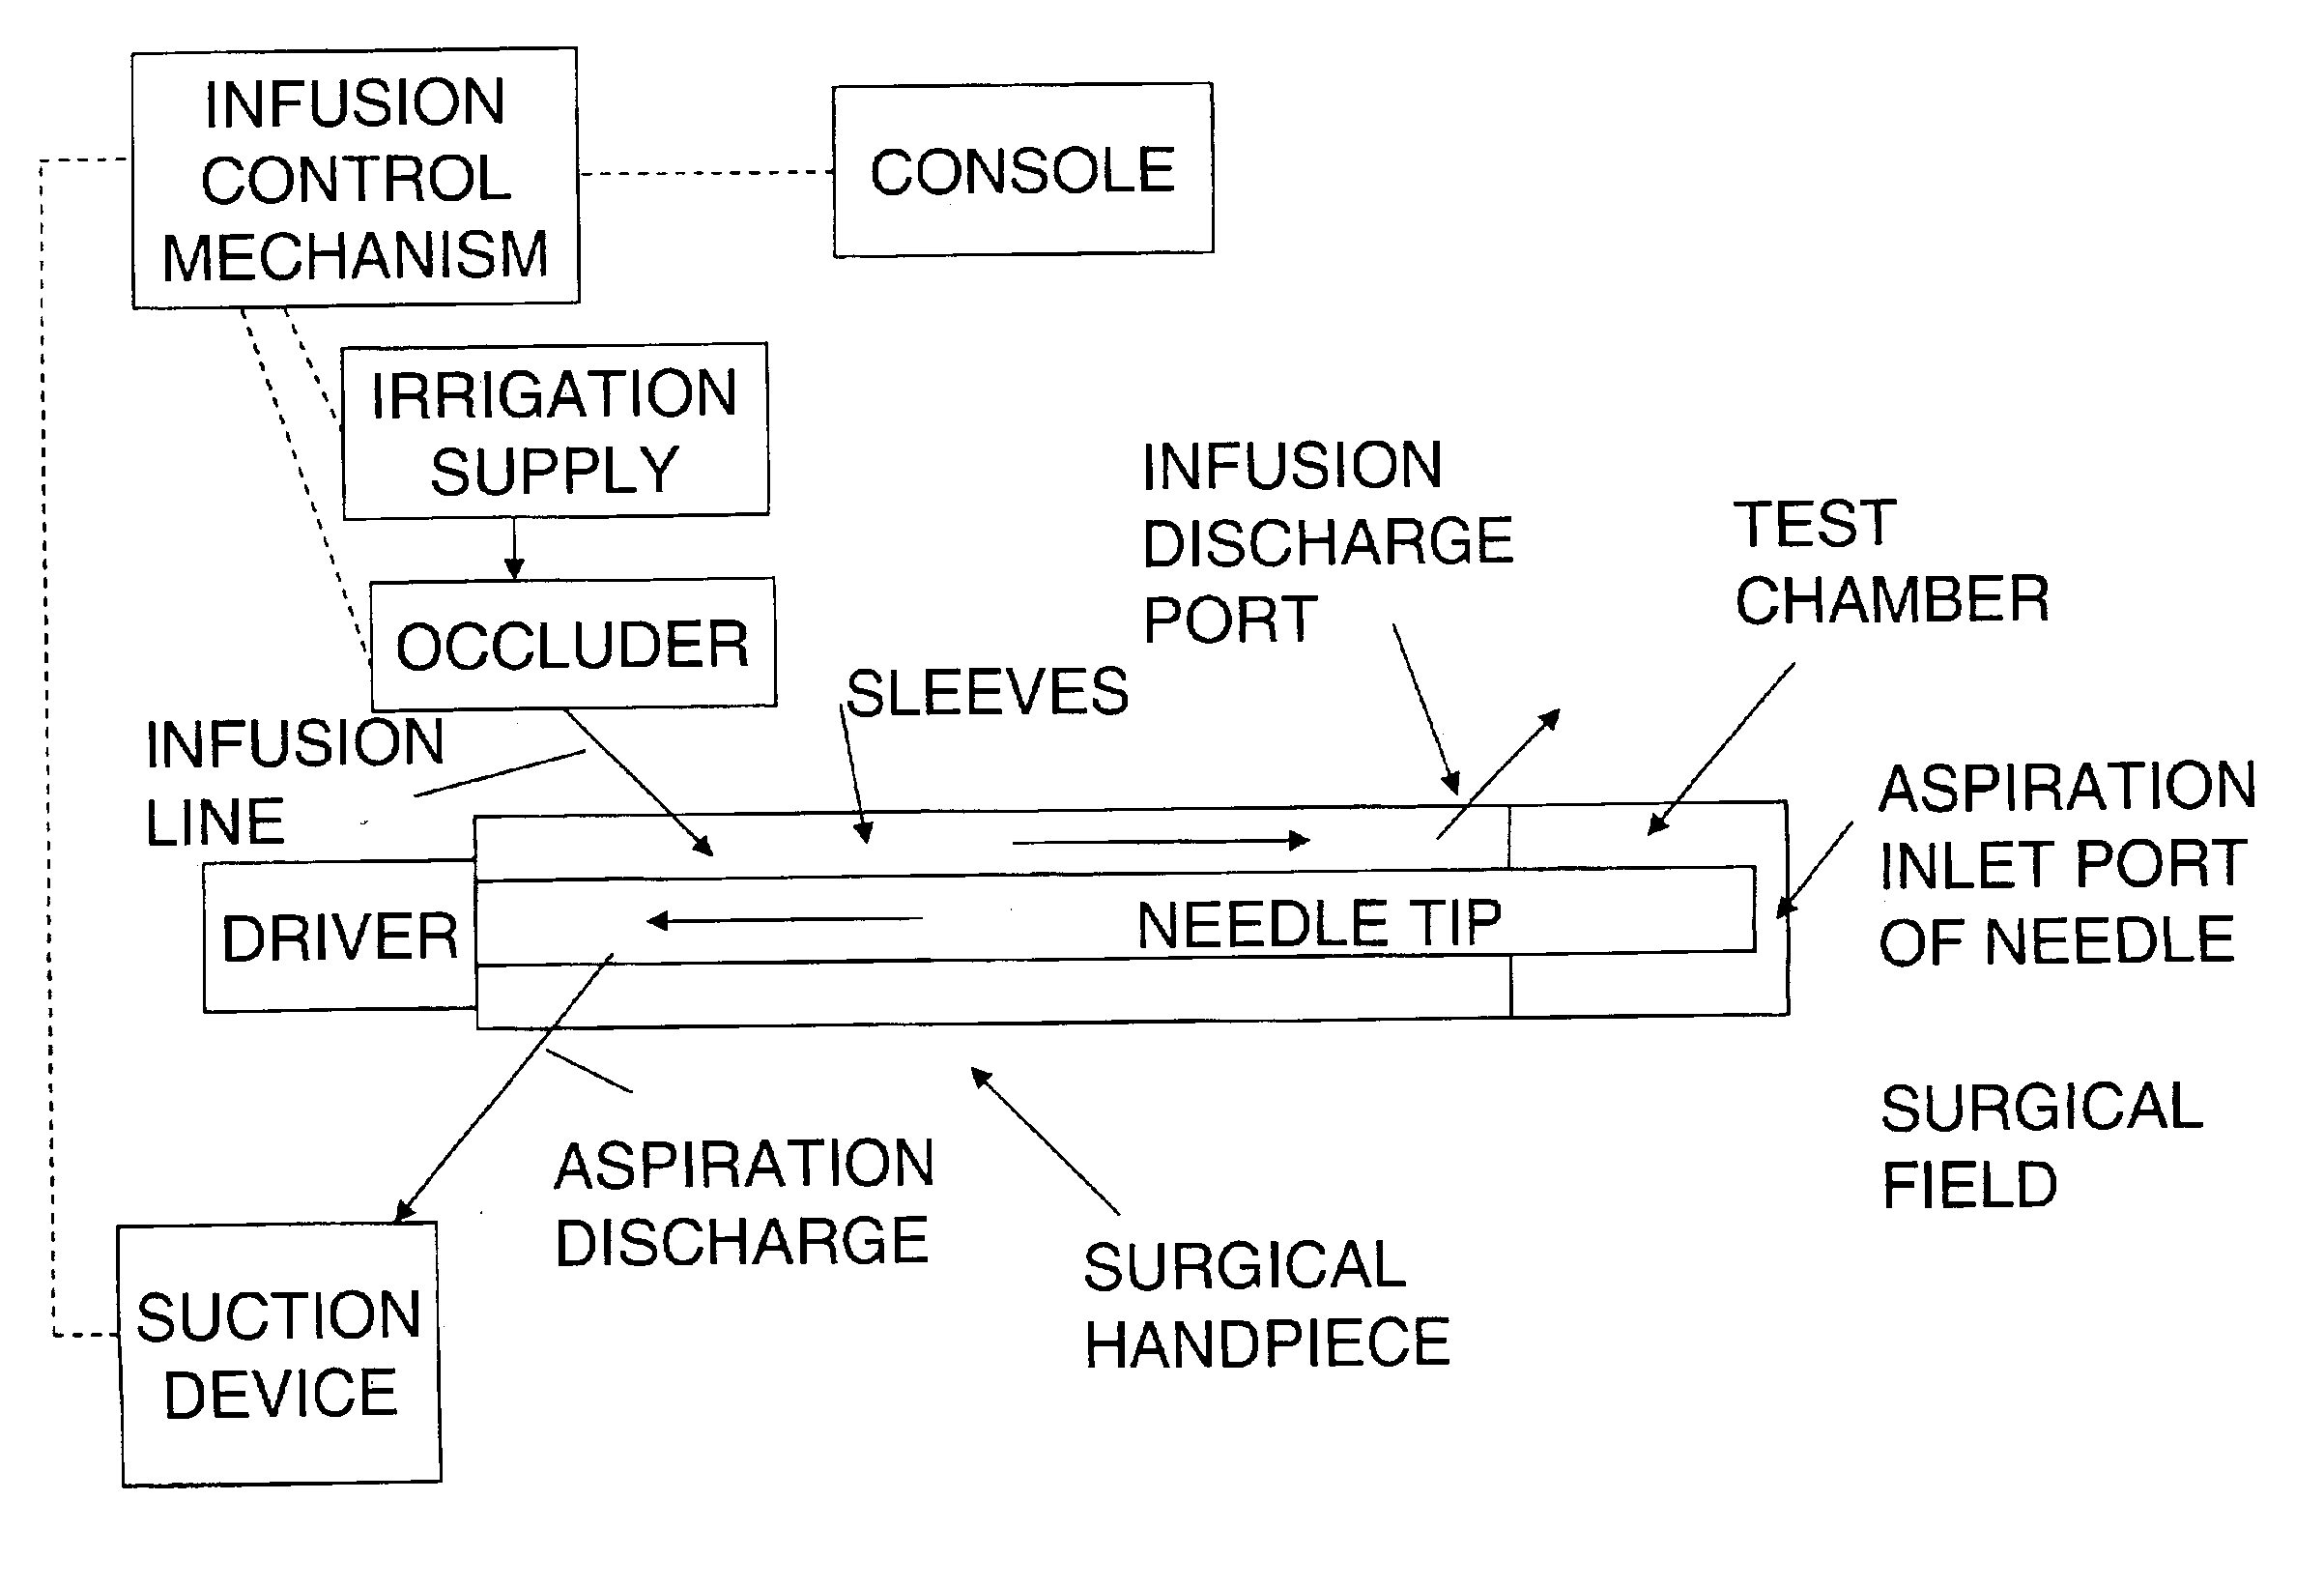 Reduction or elimination of the introduction of air within fluid introduced into a surgical field